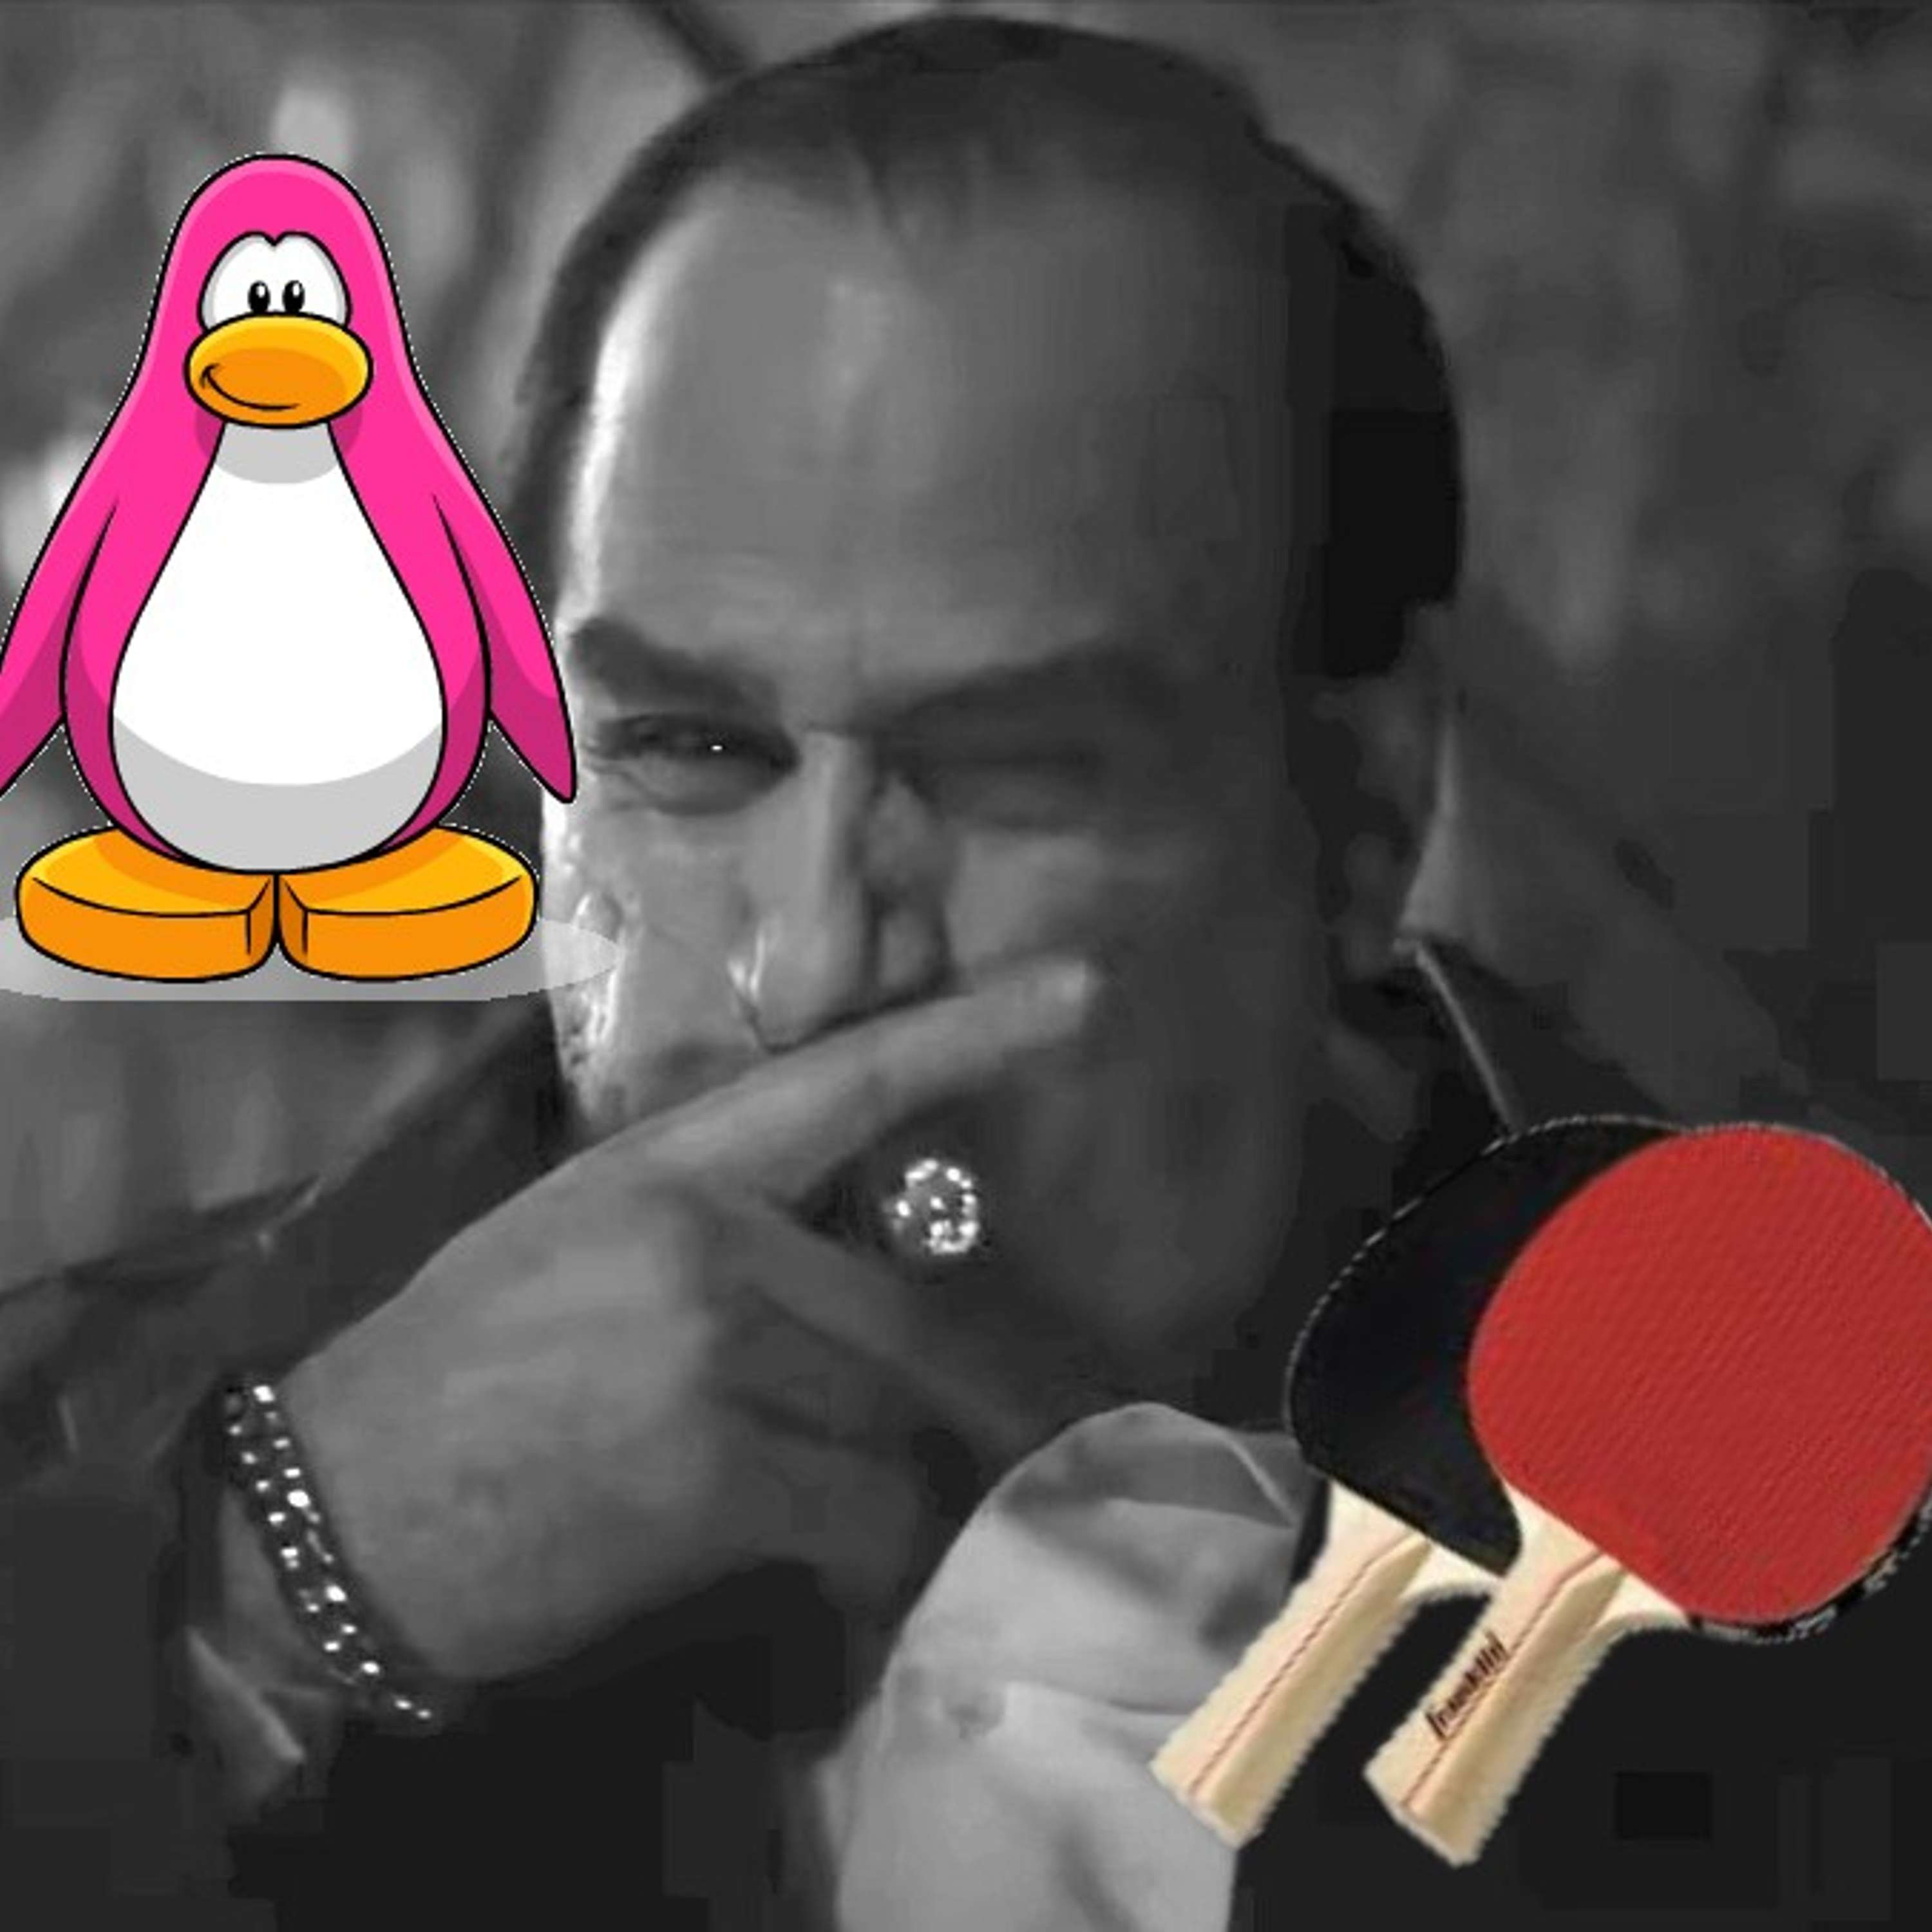 The Ping Pong Penguin